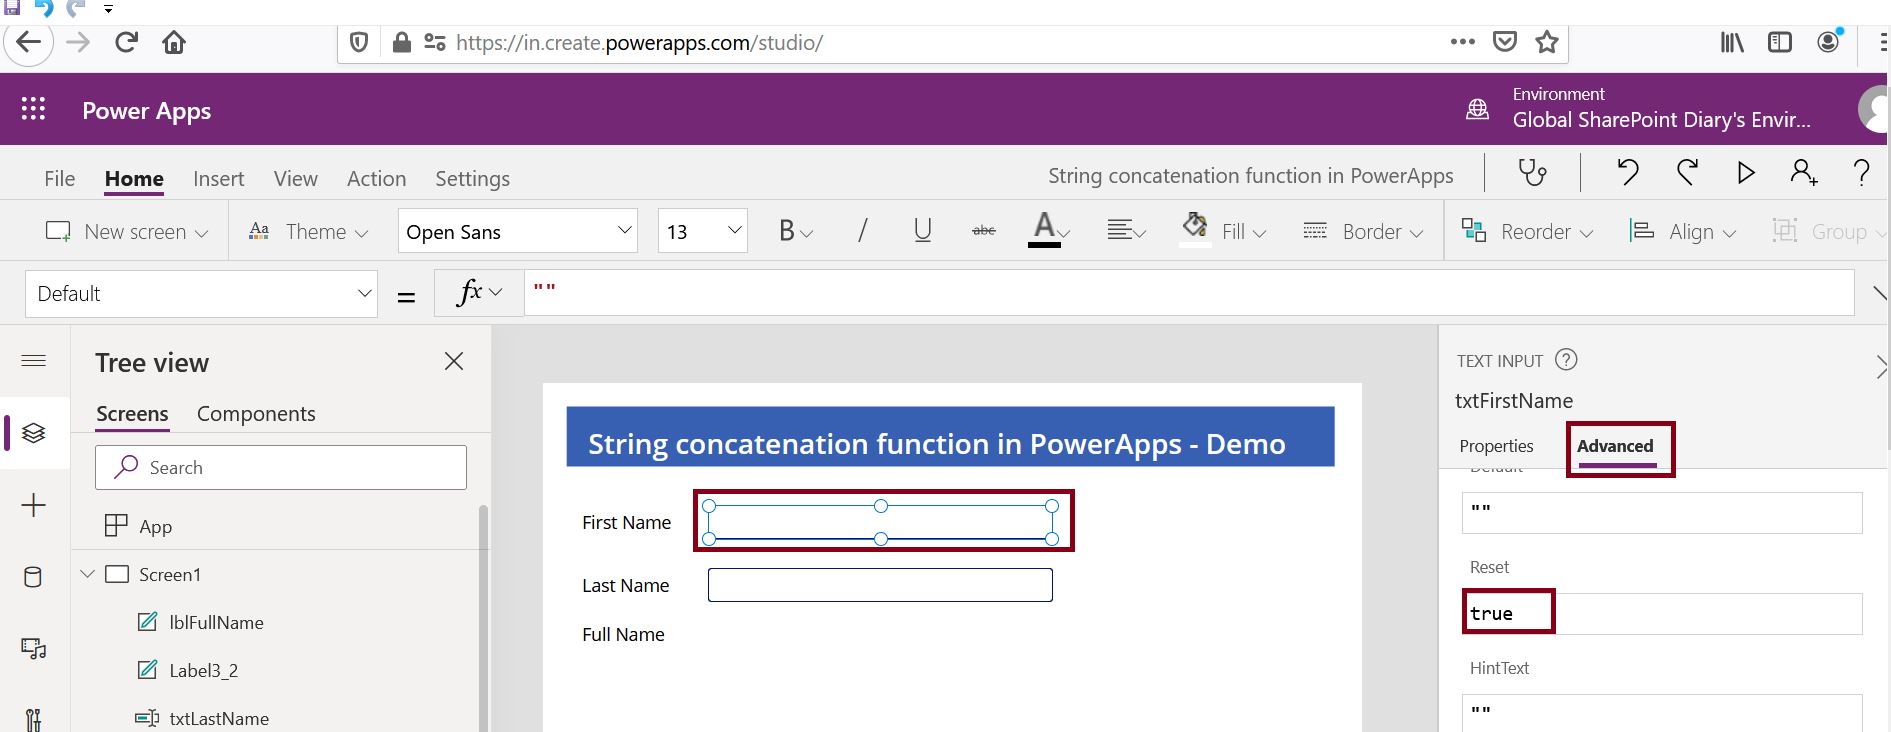 How to reset the control in PowerApps?